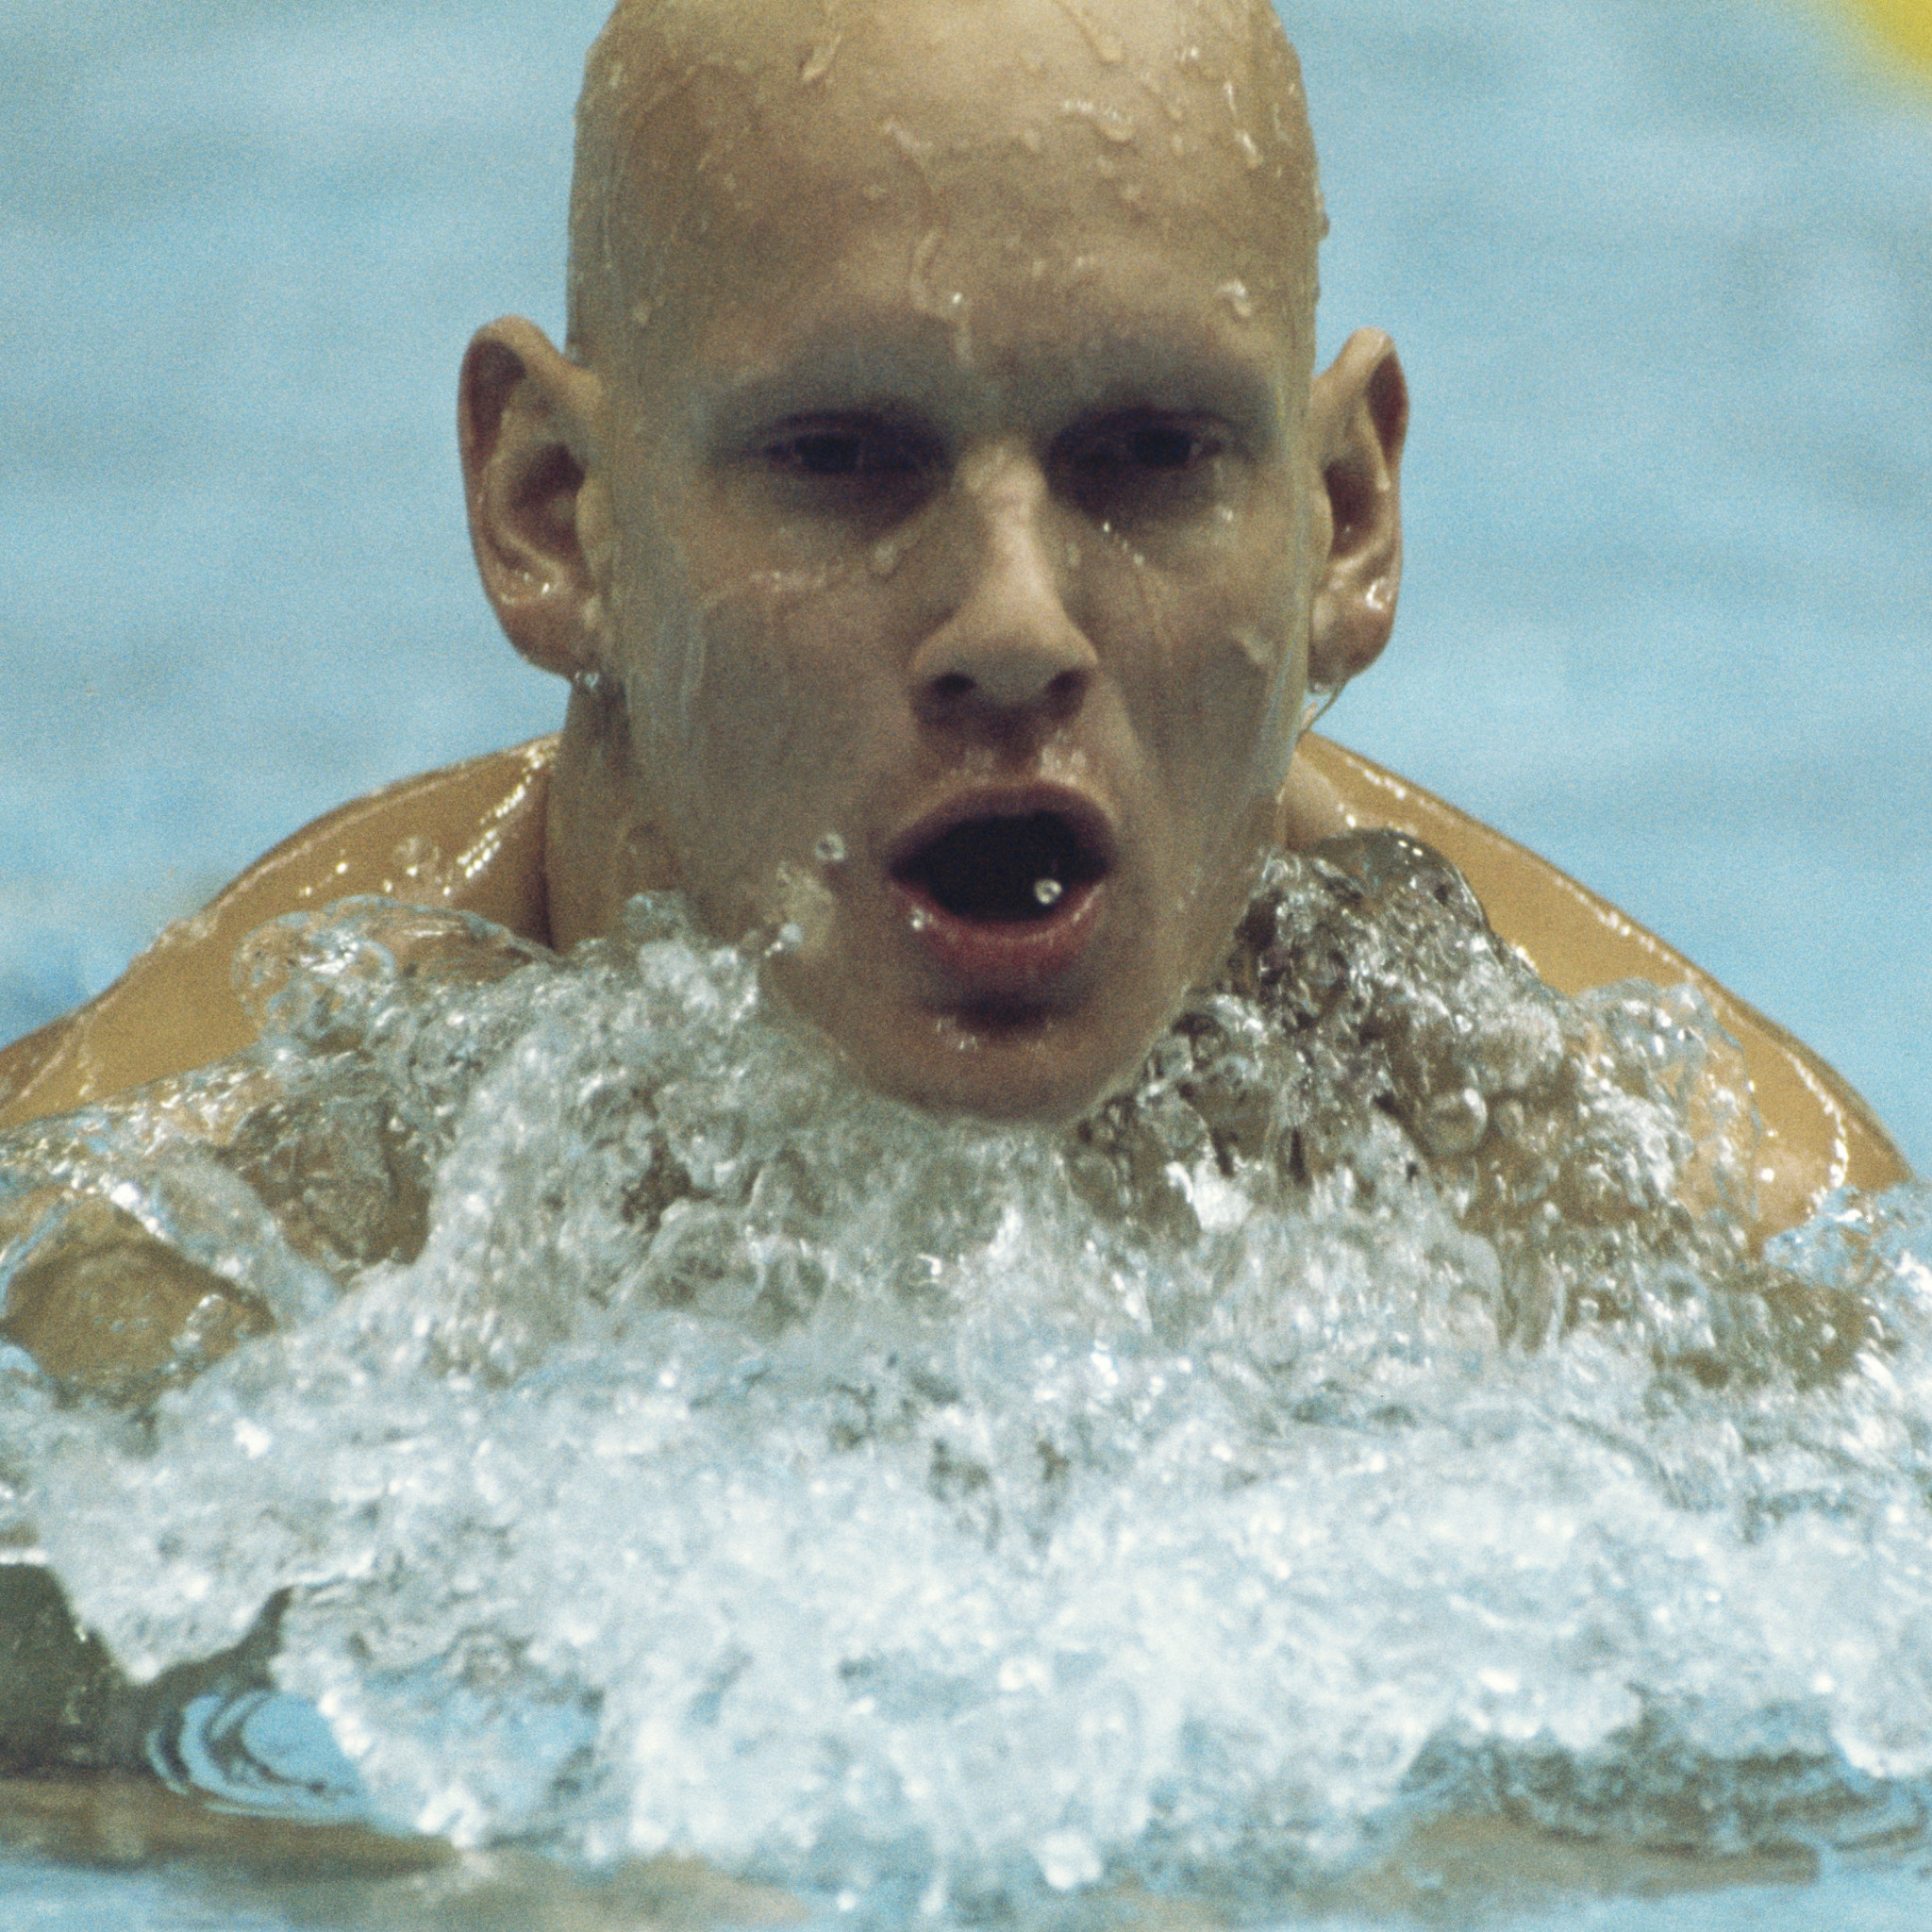 Duncan Goodhew ©Getty Images